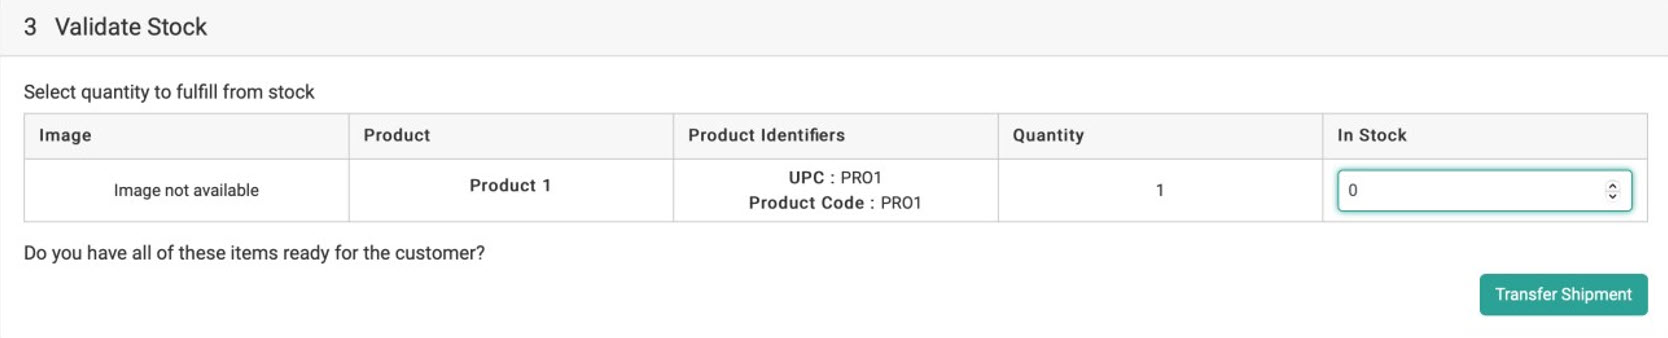 Example of the Validate Stock step with 0 items in stock and the Transfer Shipment button